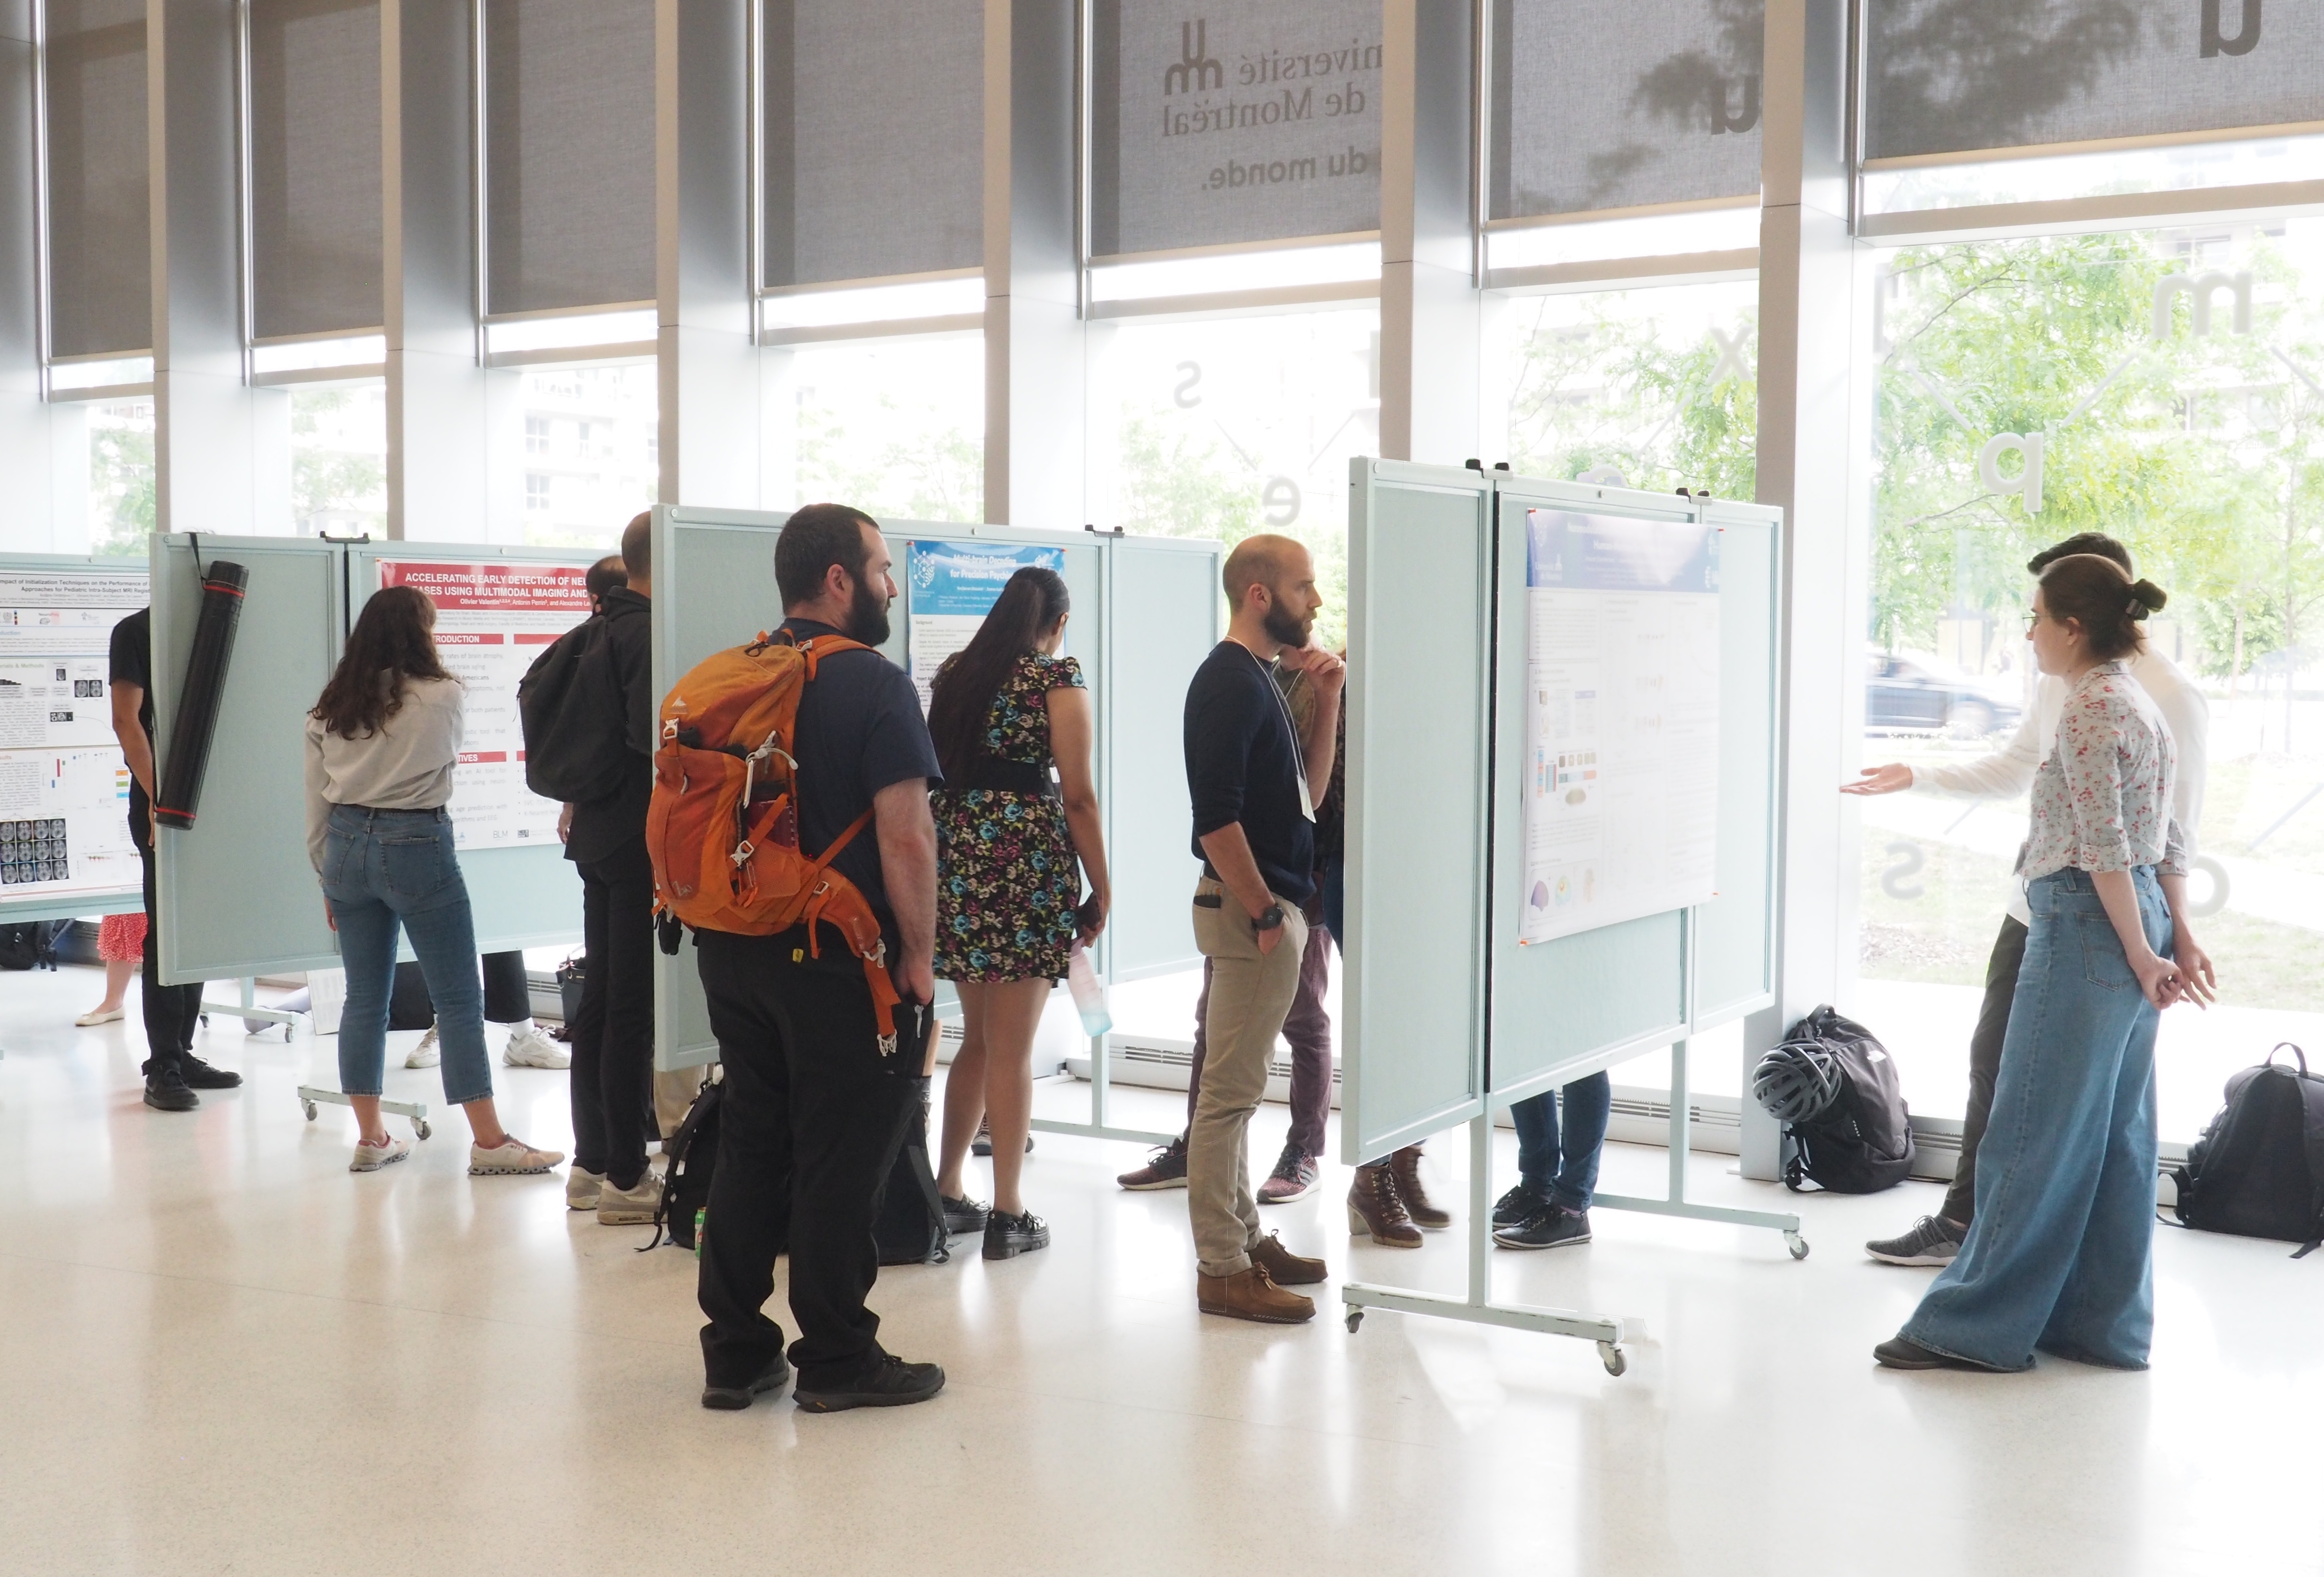 Image taken at the poster session